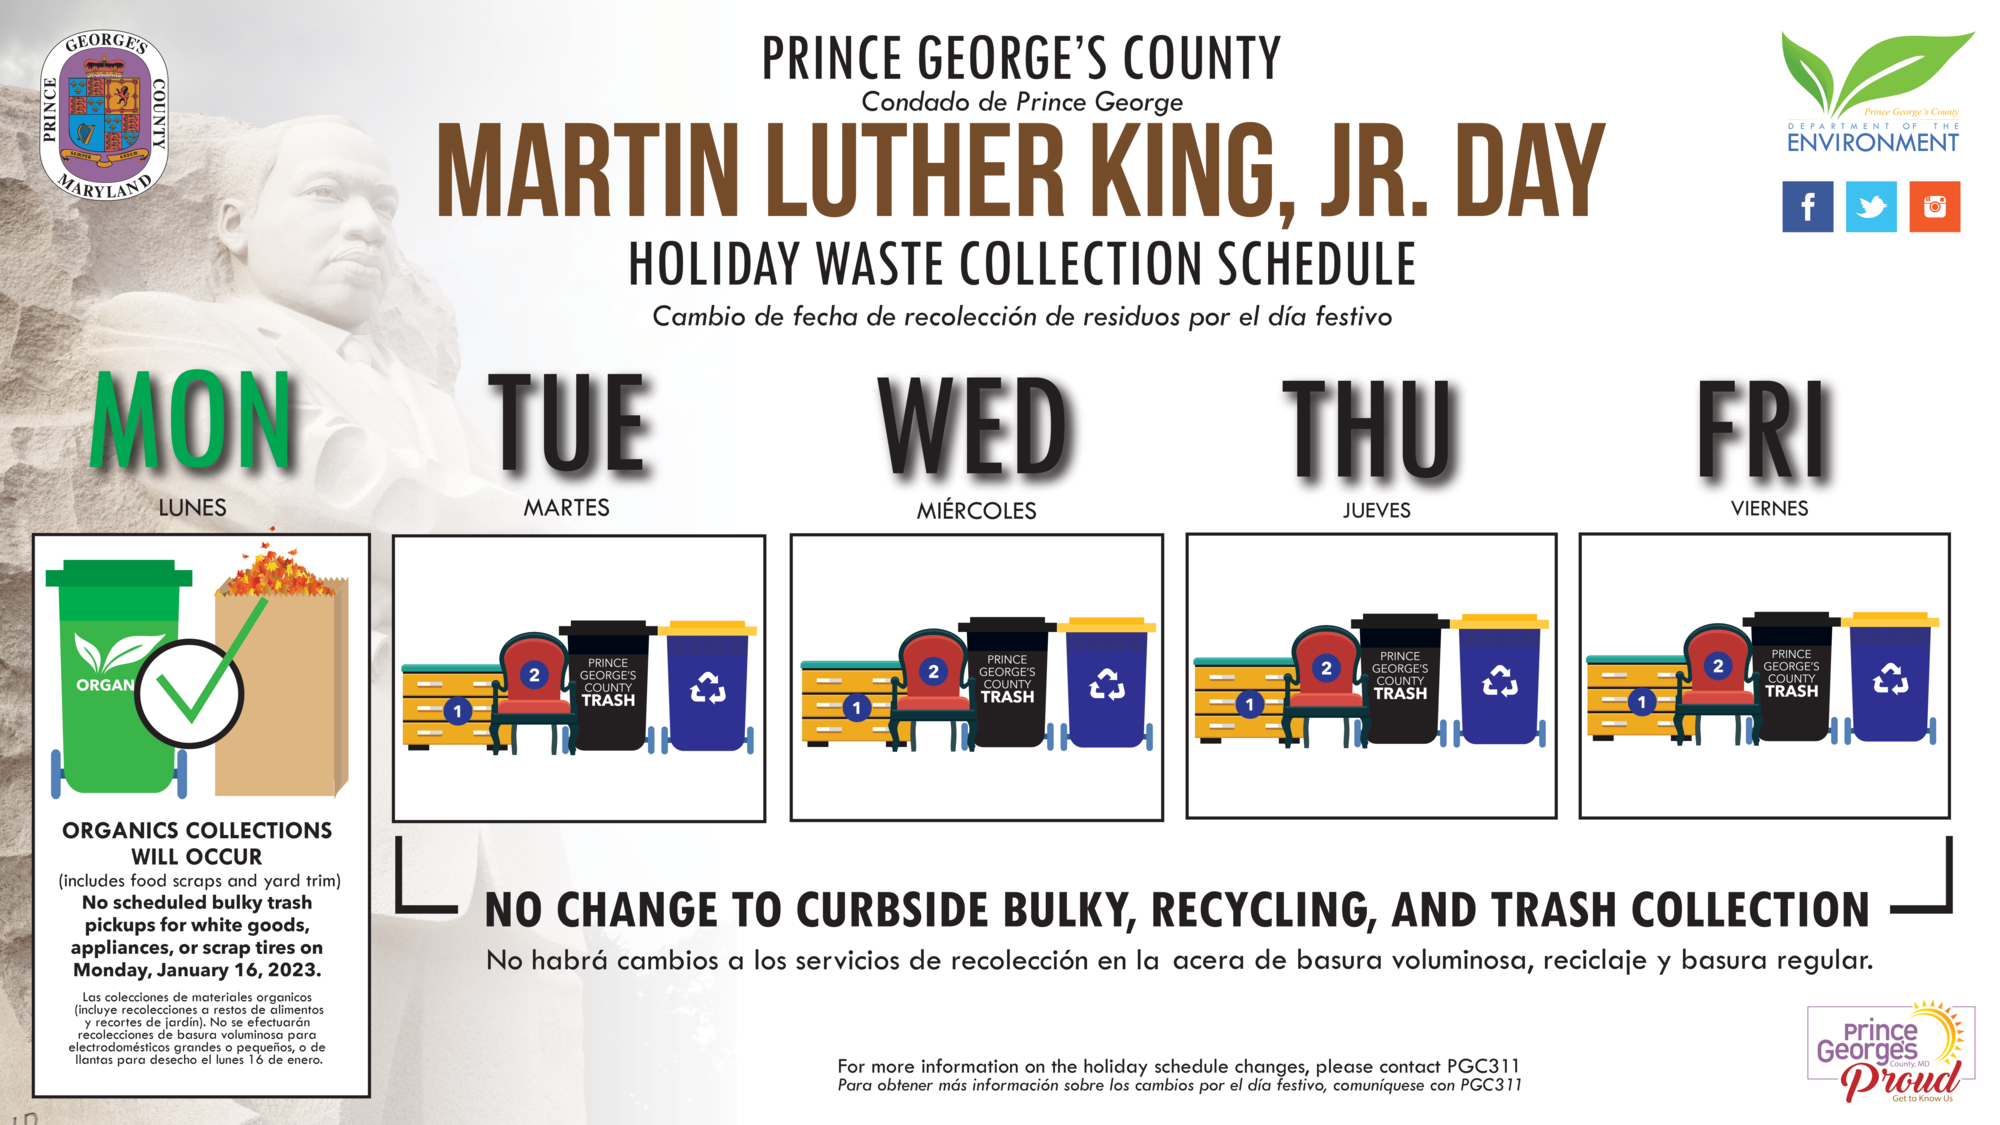 Holiday Waste Collection Schedule for MLK Jr. Day Holiday